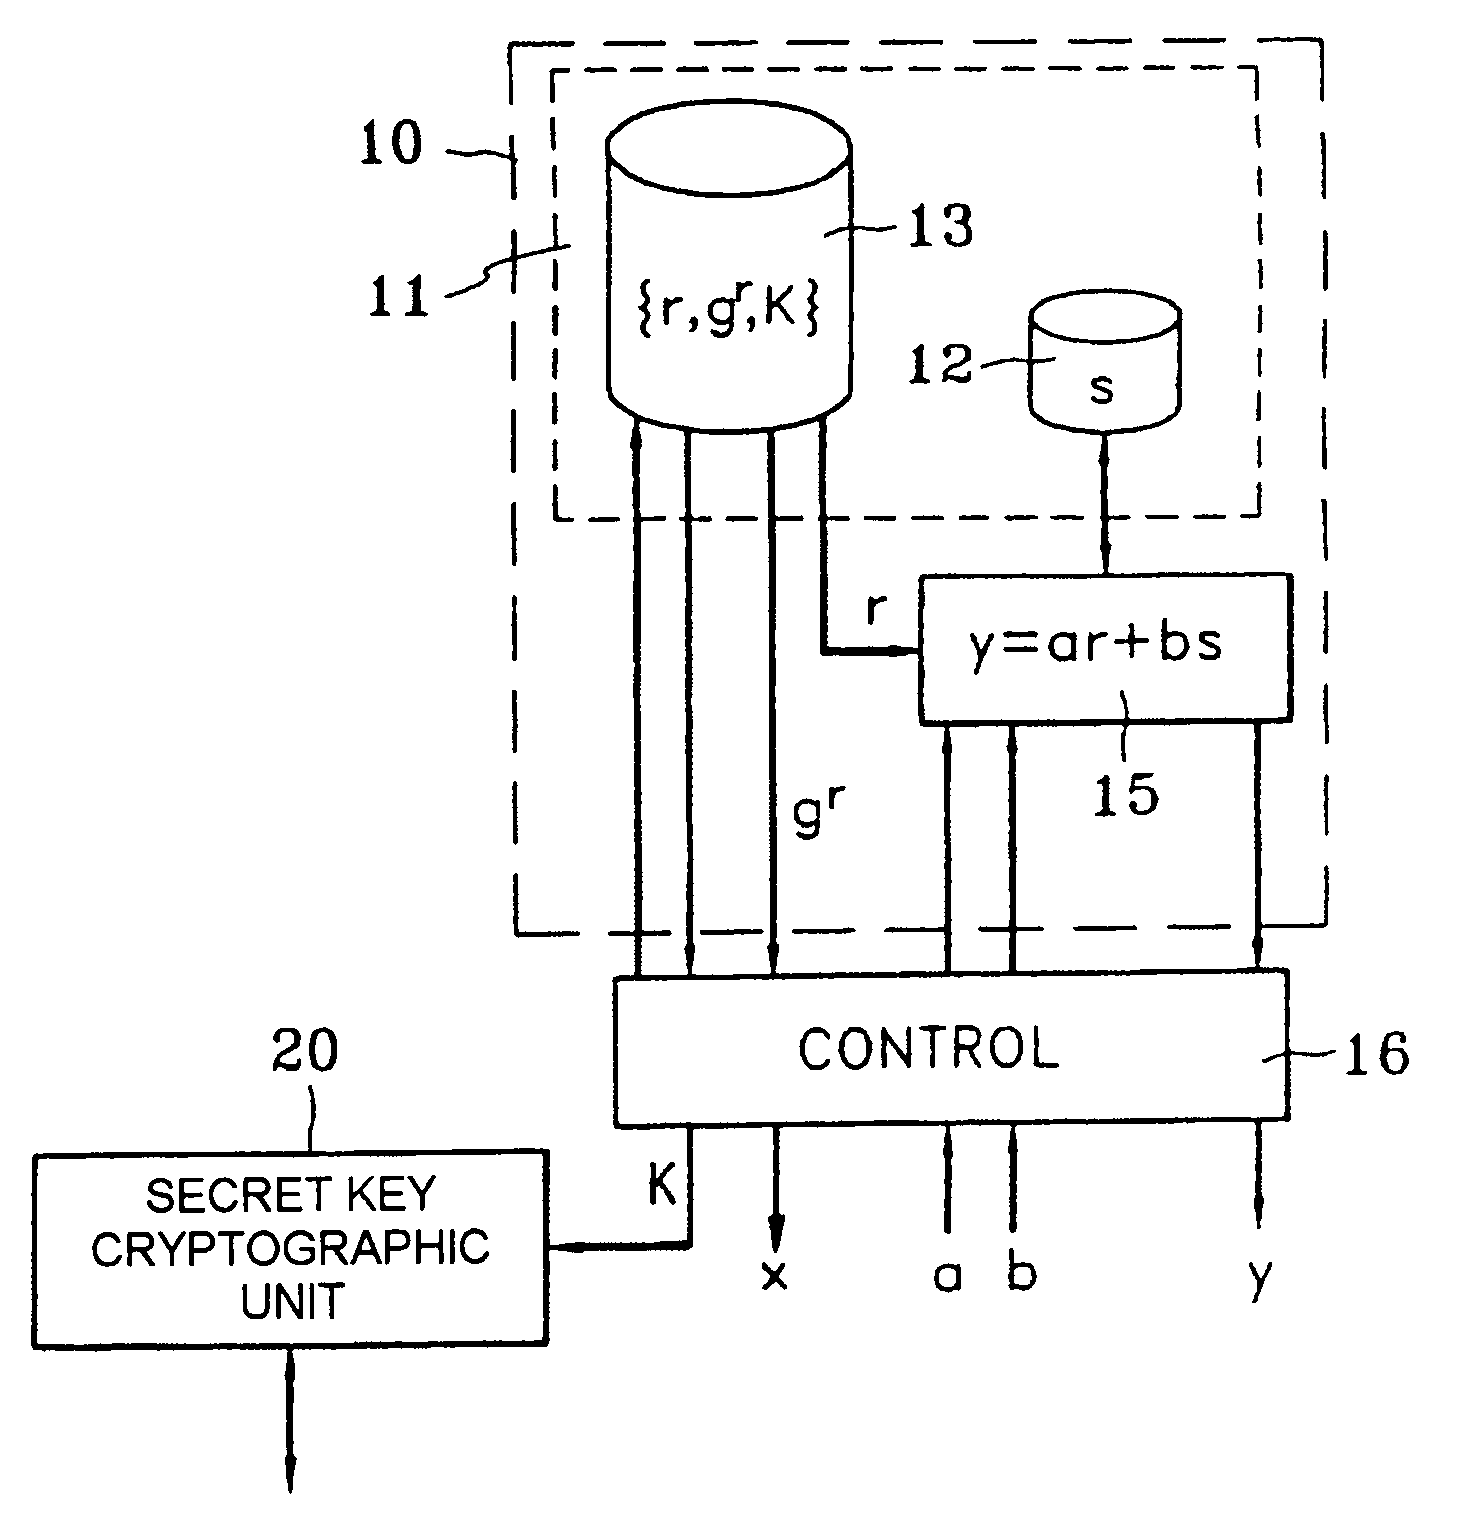 Method of producing a cryptographic unit for an asymmetric cryptography system using a discrete logarithm function